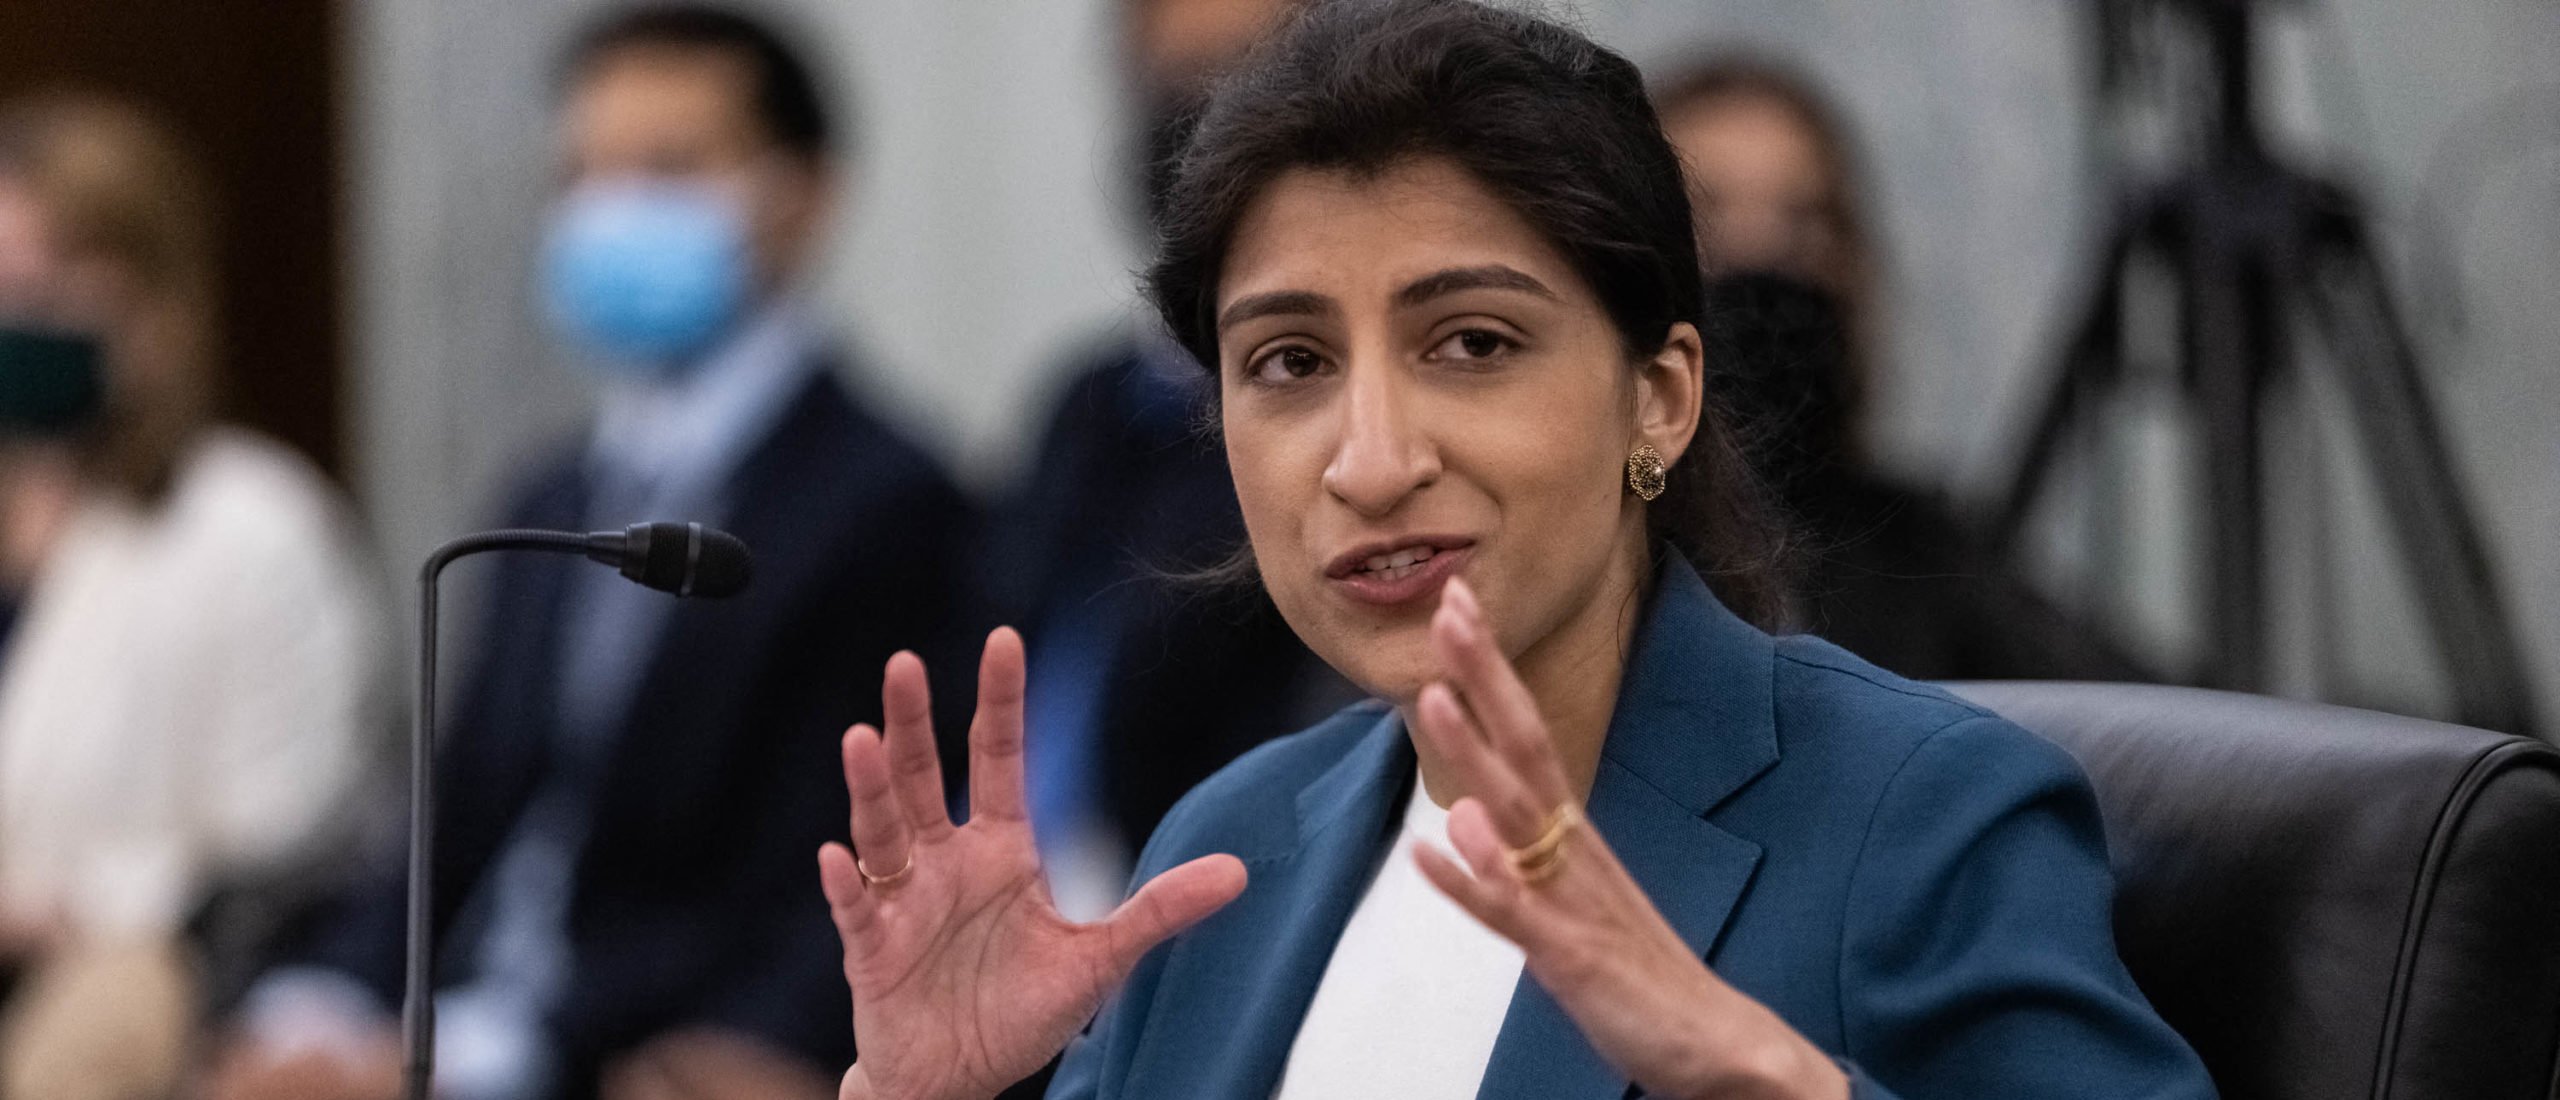 FTC Commissioner nominee Lina M. Khan testifies during a Senate Committee on Commerce, Science, and Transportation confirmation hearing on Capitol Hill in Washington, DC, April 21, 2021. (Photo by Graeme Jennings / POOL / AFP) (Photo by GRAEME JENNINGS/POOL/AFP via Getty Images)